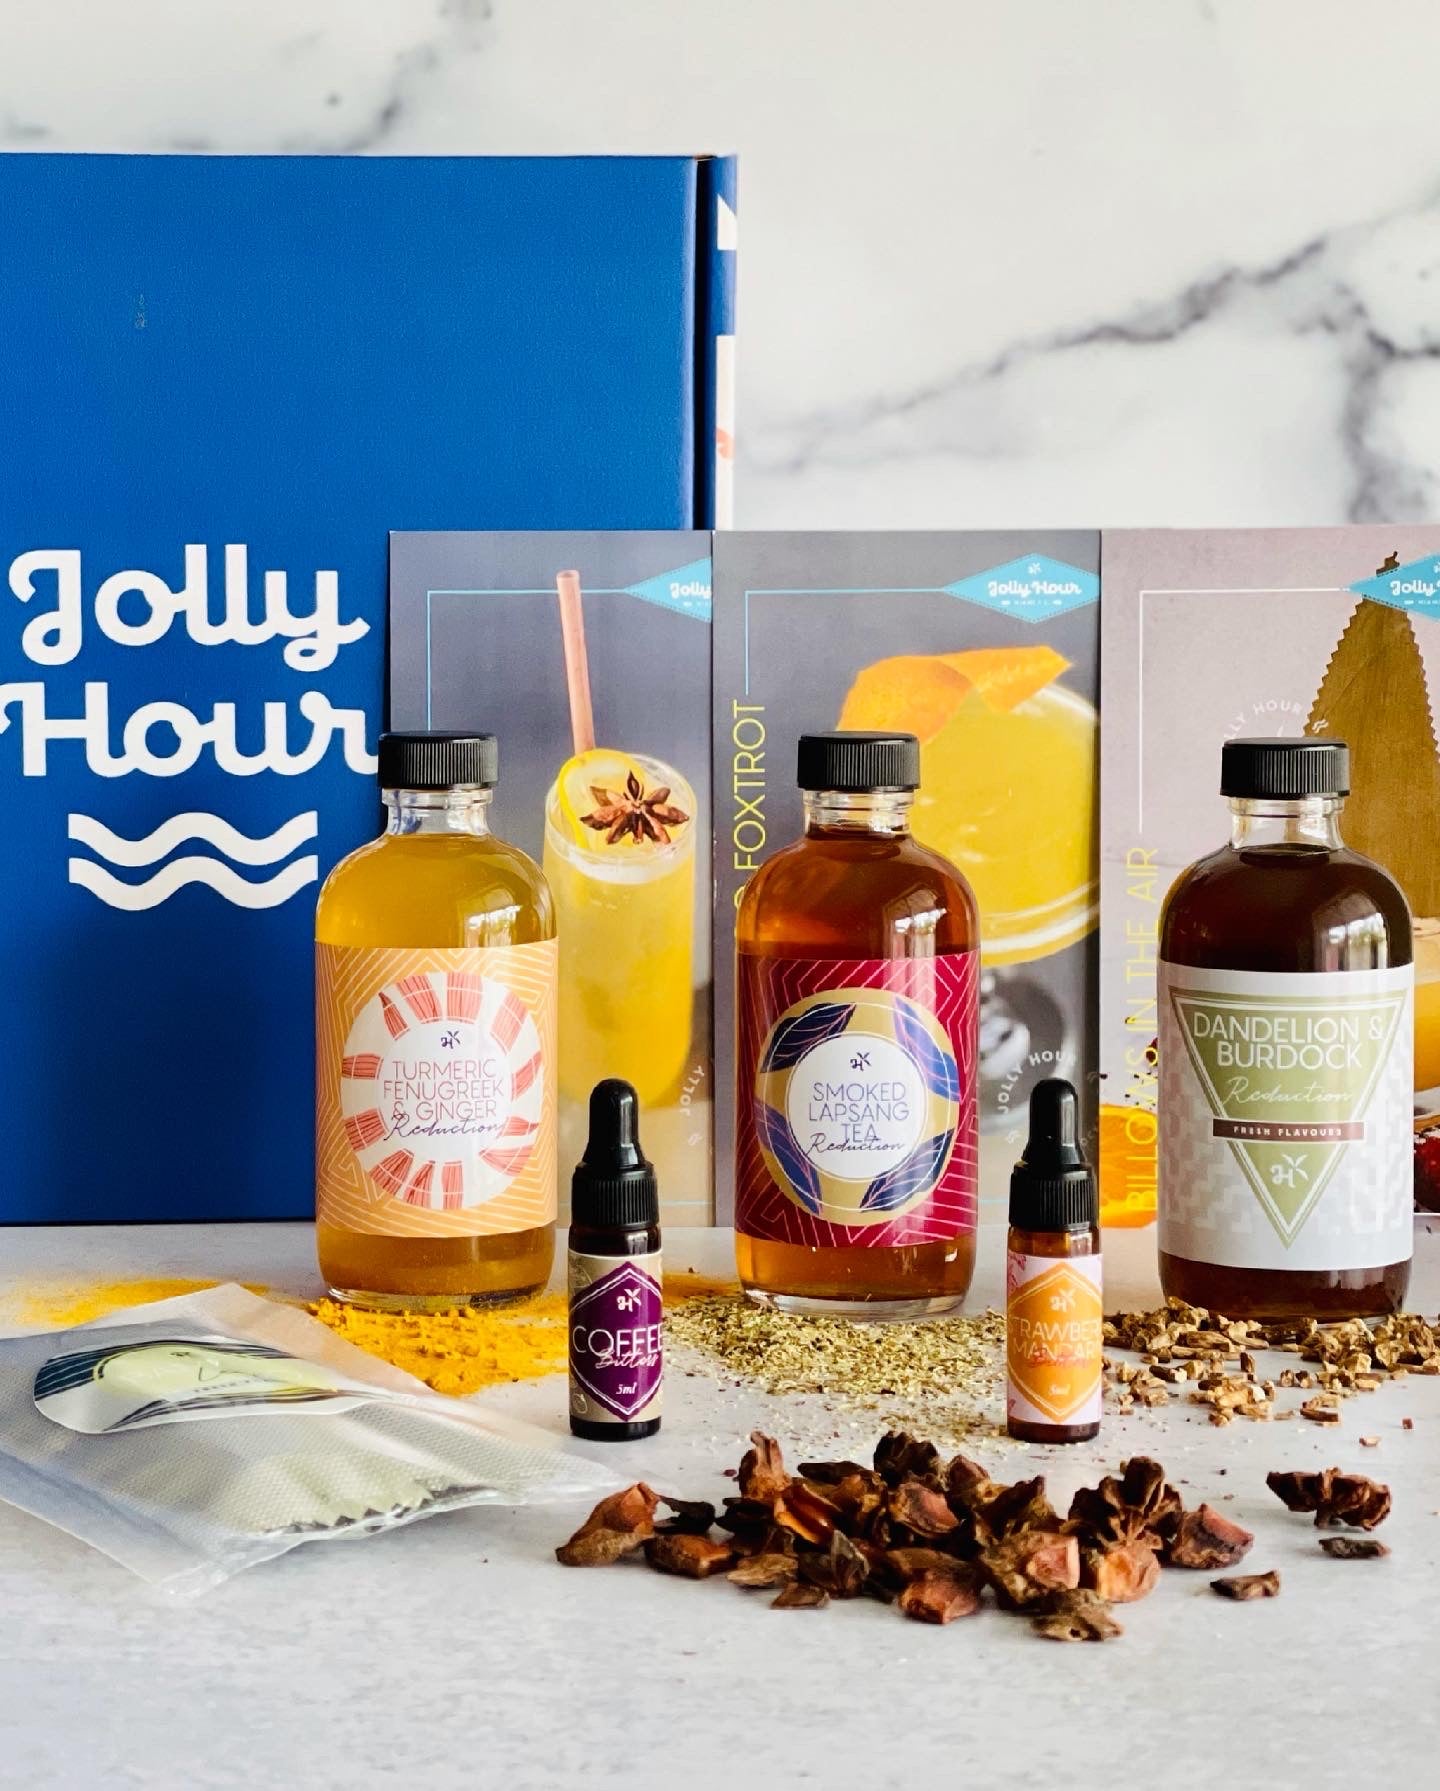 Jolly Hour Box | 3 cocktail mixers